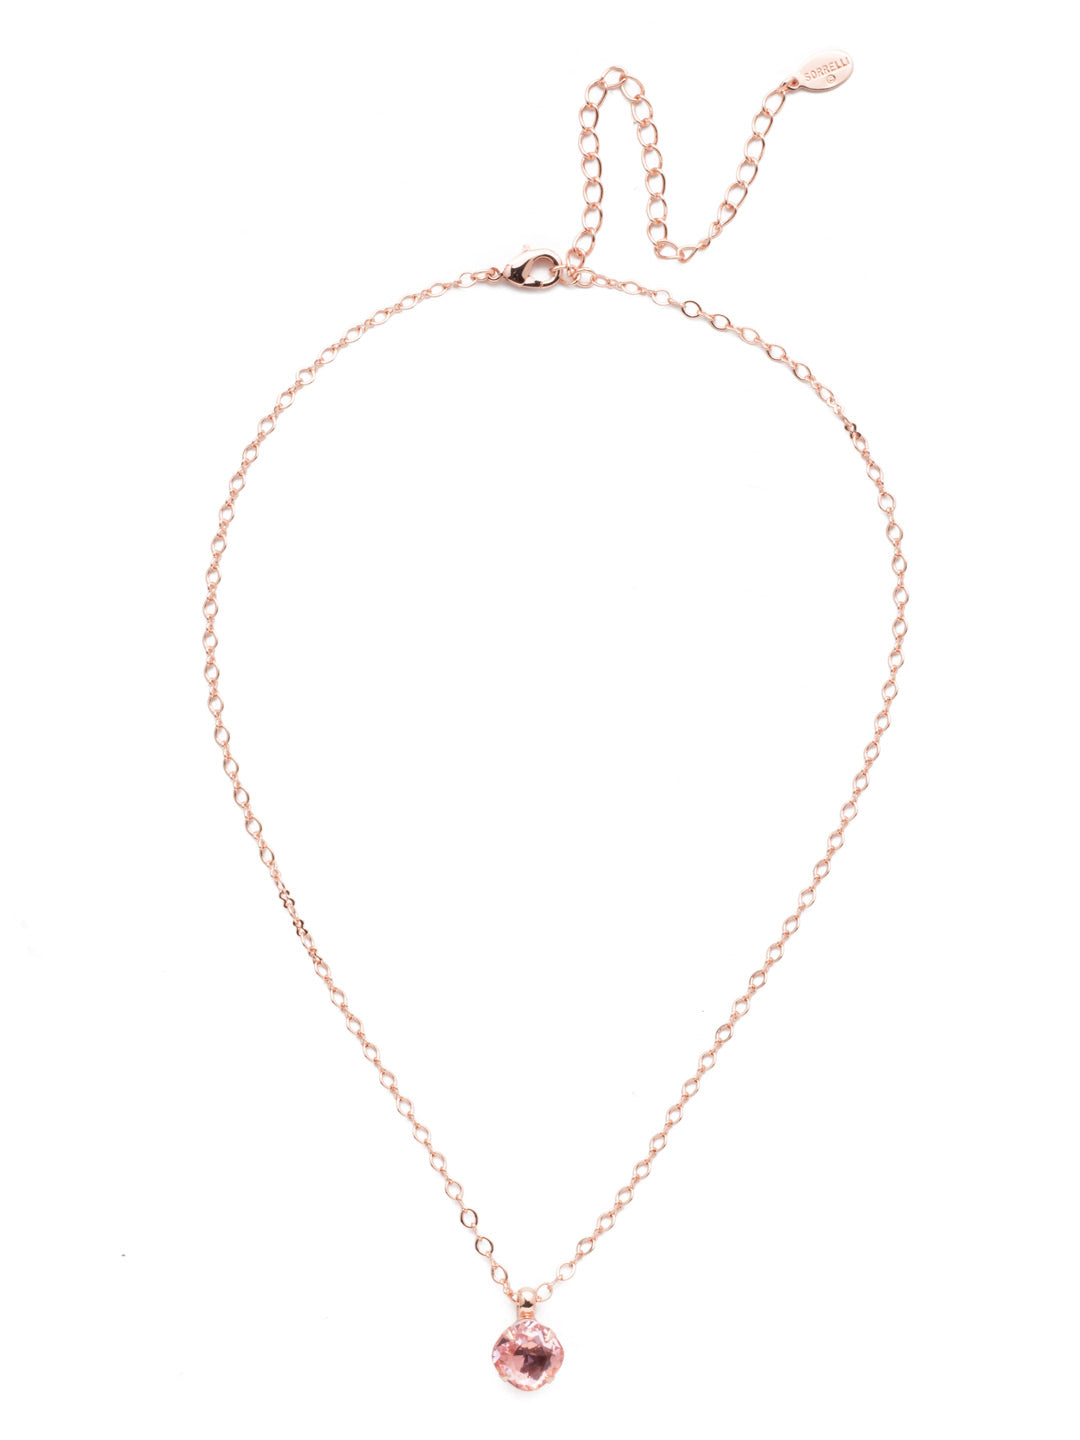 Lilium Pendant Necklace - NEP26RGPK - The Lilium Pendant necklace is the perfect everyday necklace. On a delicate chain hangs a gorgoues crystal stone. From Sorrelli's Pink collection in our Rose Gold-tone finish.